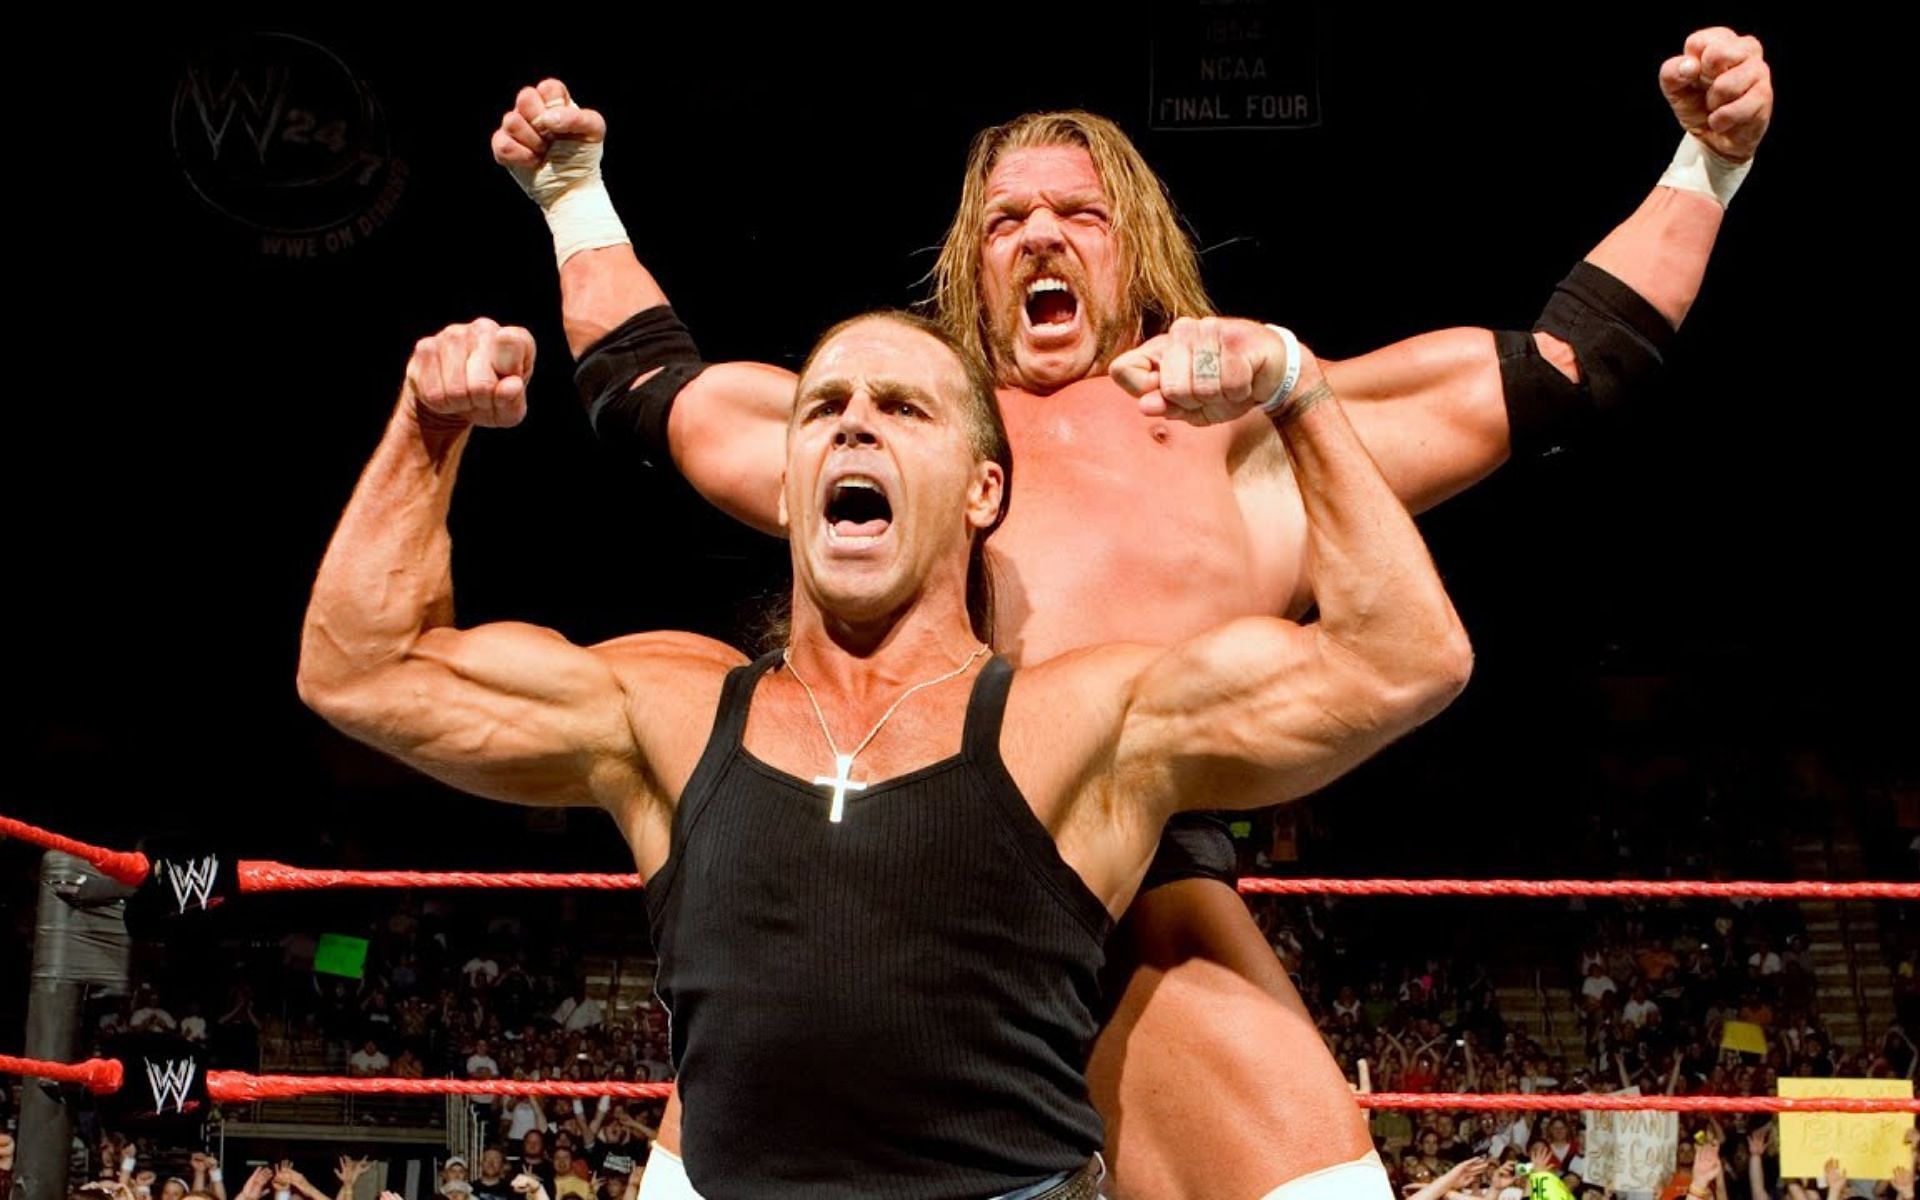 Triple H and Shawn Michaels are set to appear on WWE RAW